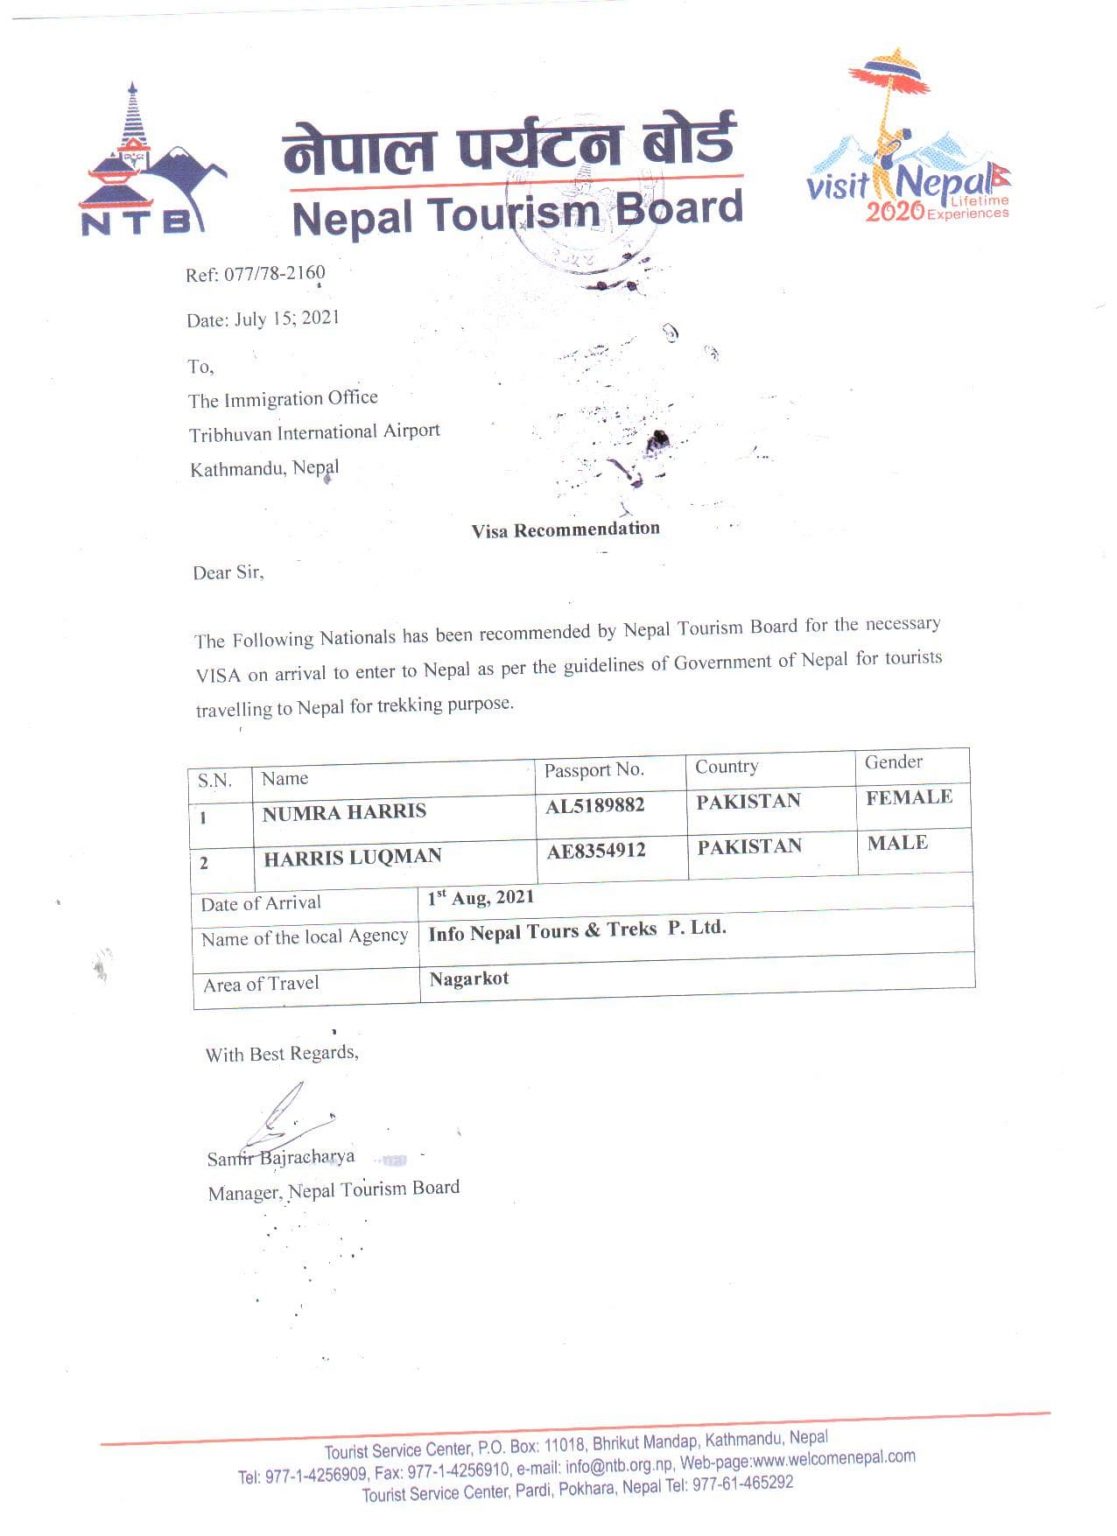 Invitation letter for Visa Approval - Department of Immigration Nepal